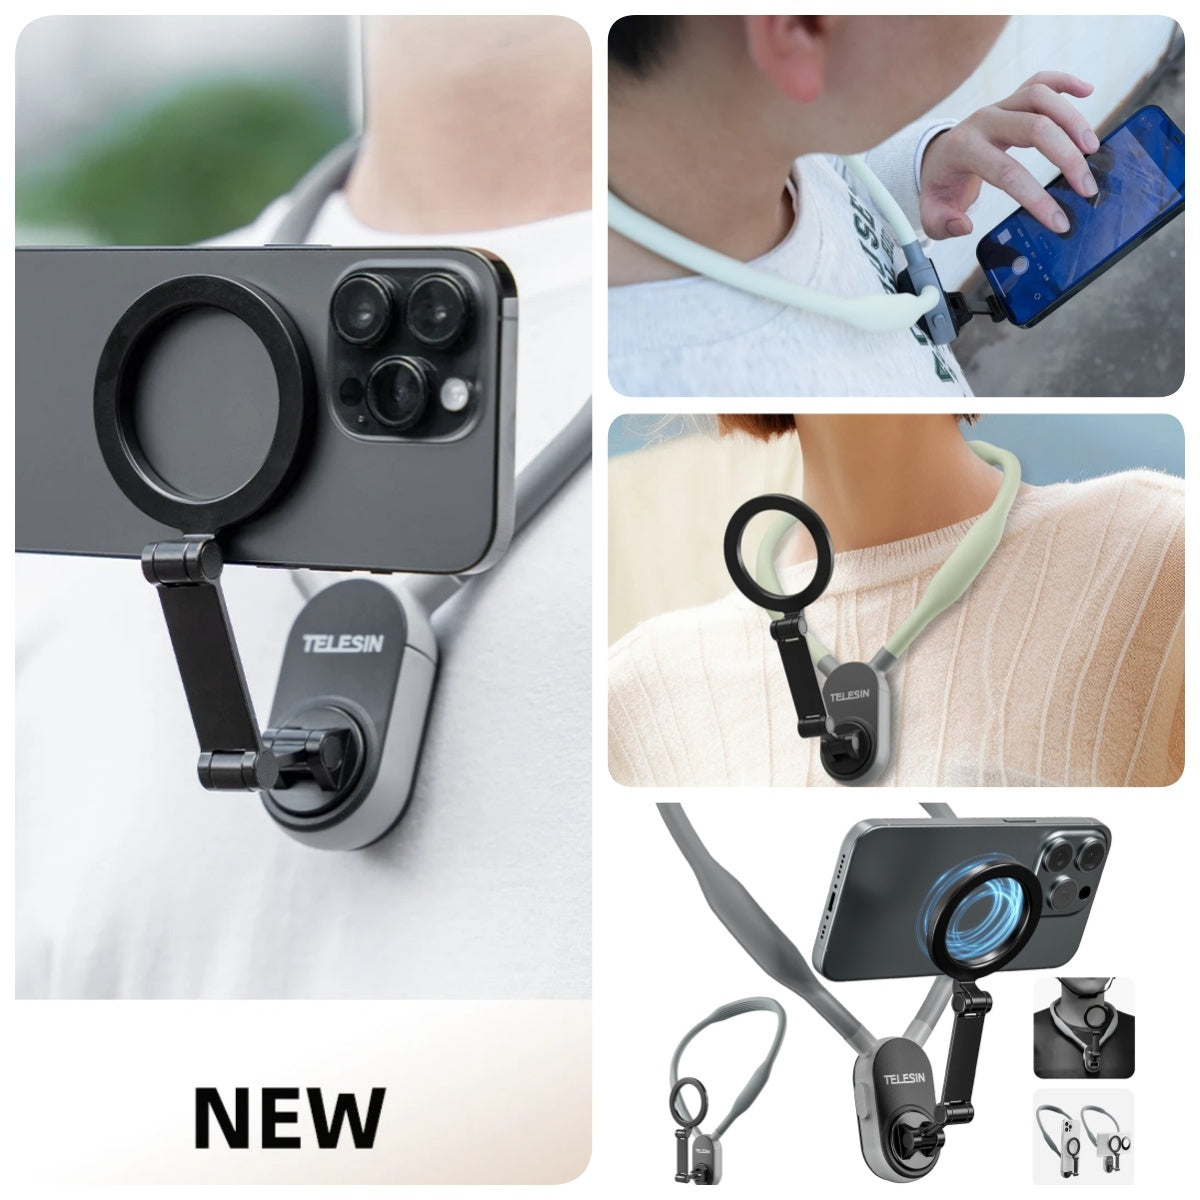 Silicone Magnetic Neck Mount for Phones - Quick Release Neck Hanging Bracket with MagSafe Magnetic Suction